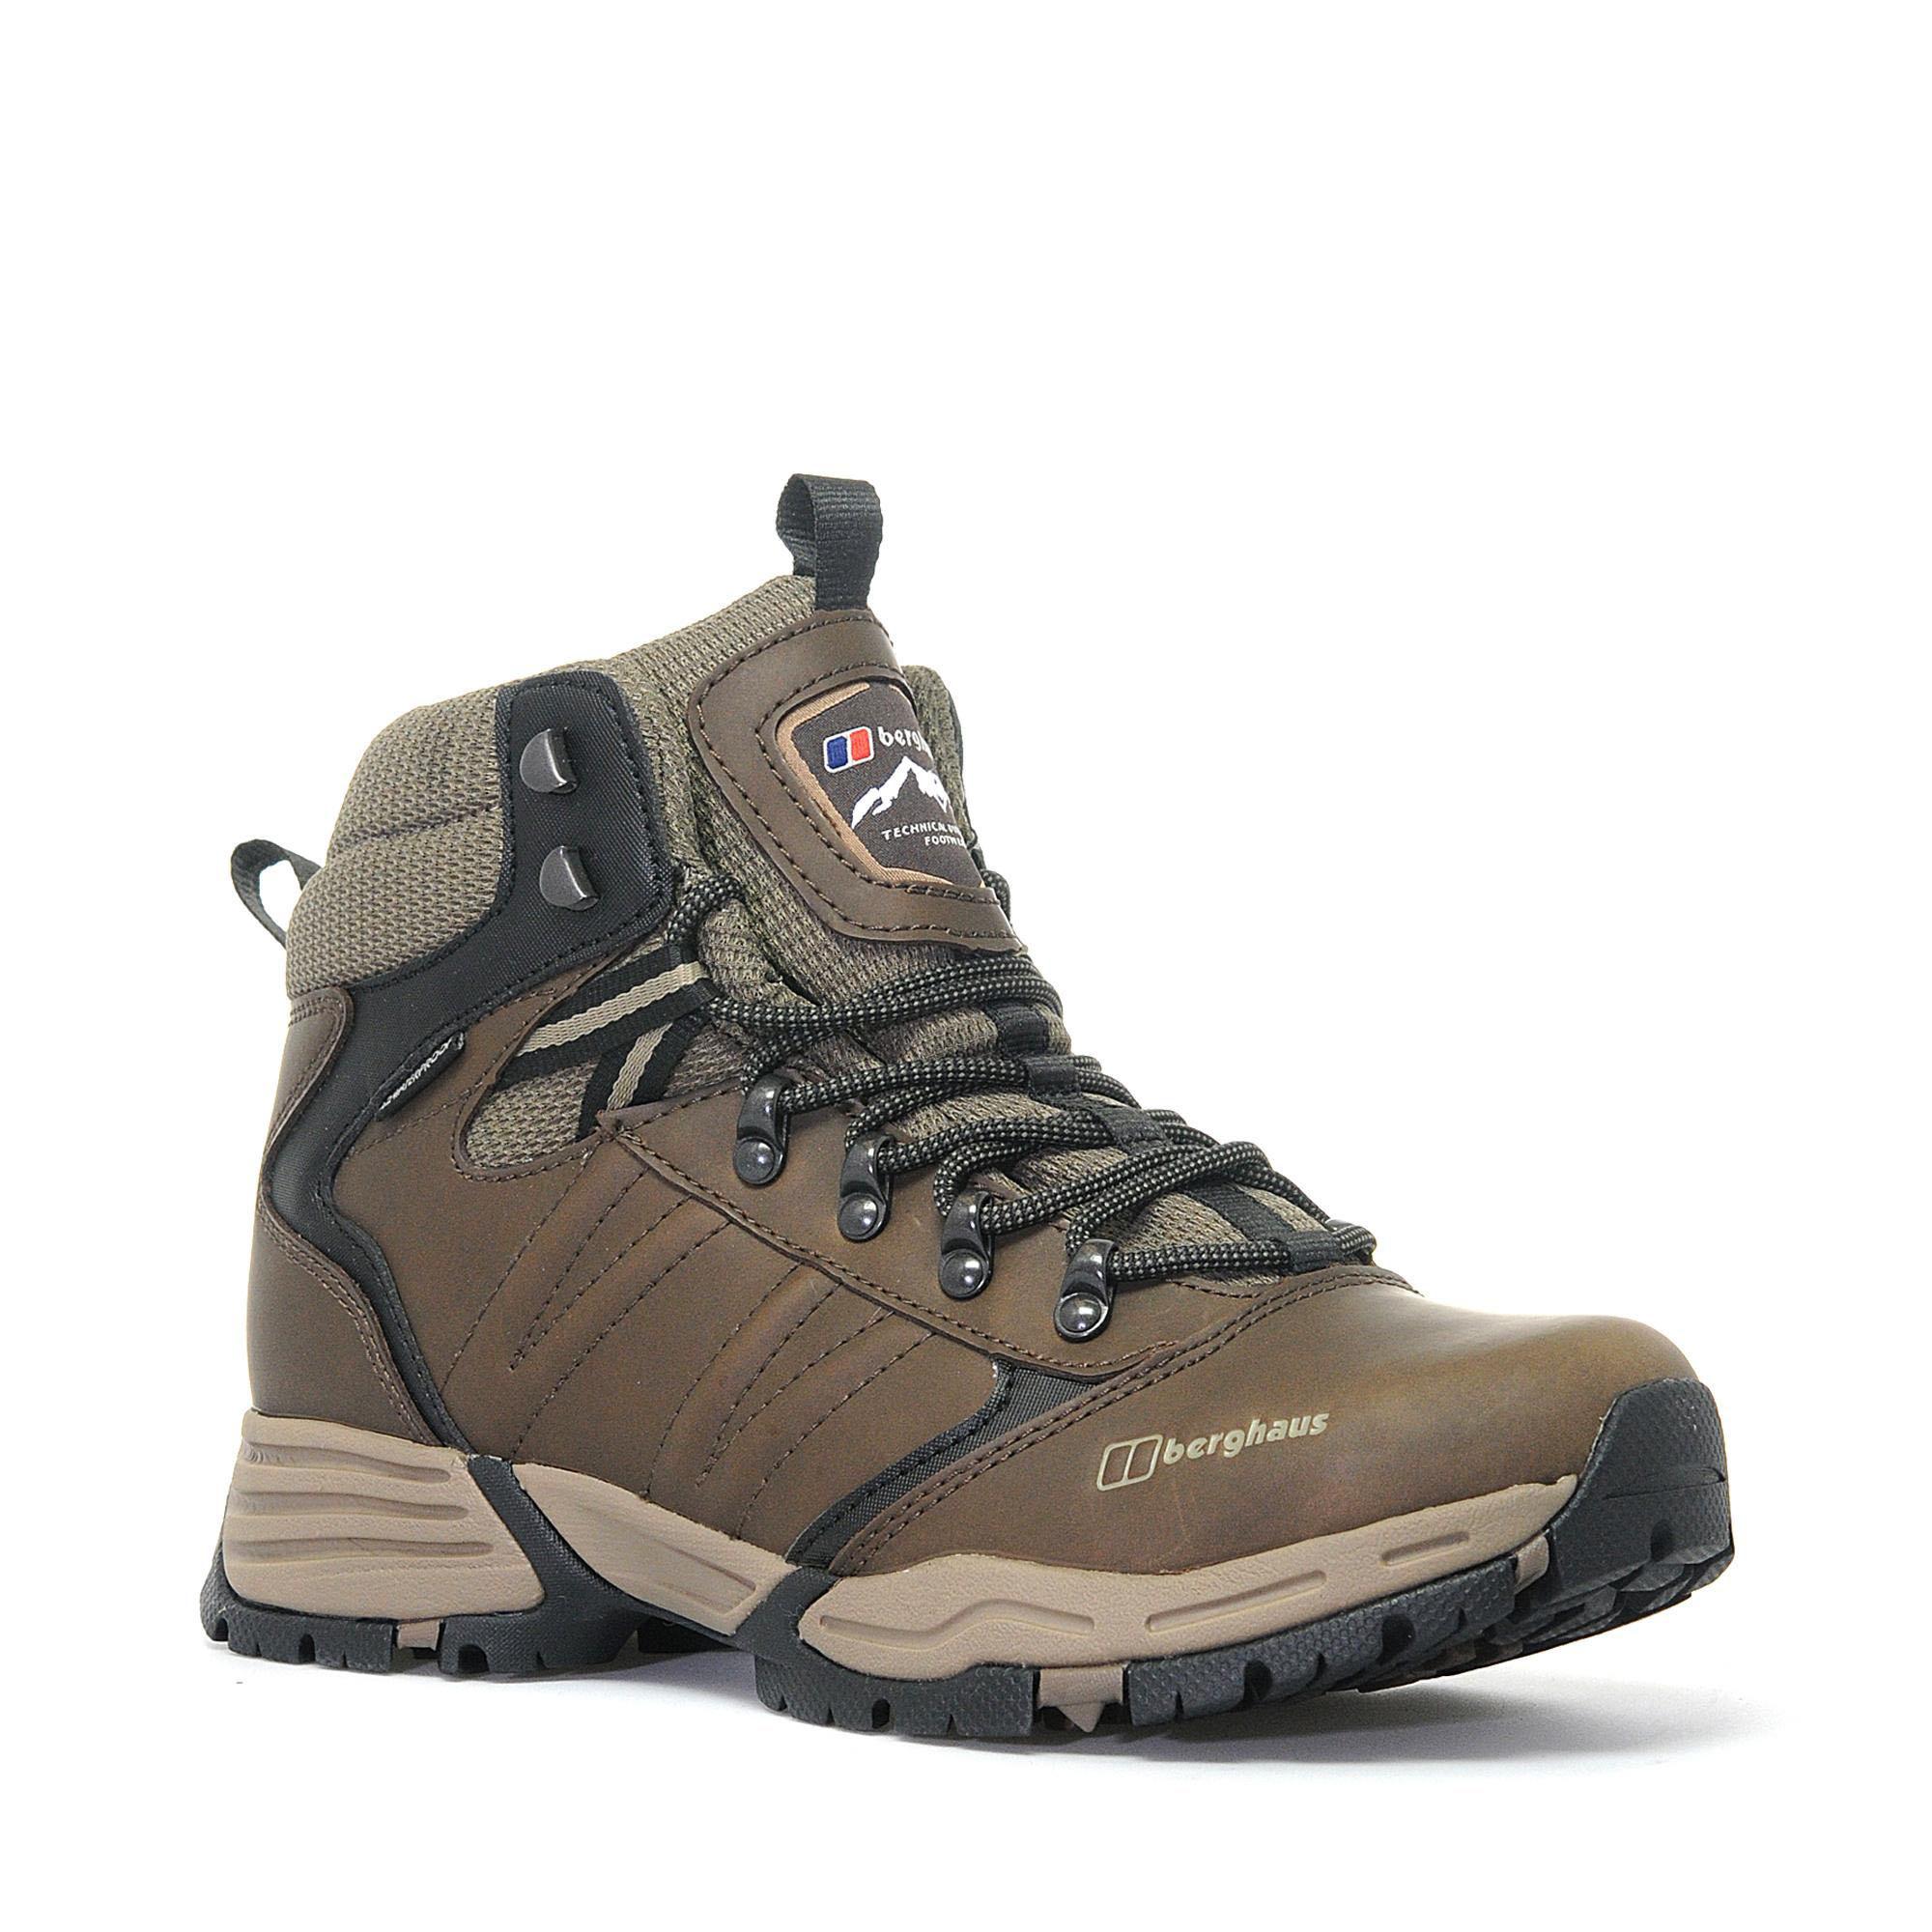 Women’s Expeditor Aqâ ¢ Leather Hiking Boots – Tagstorm